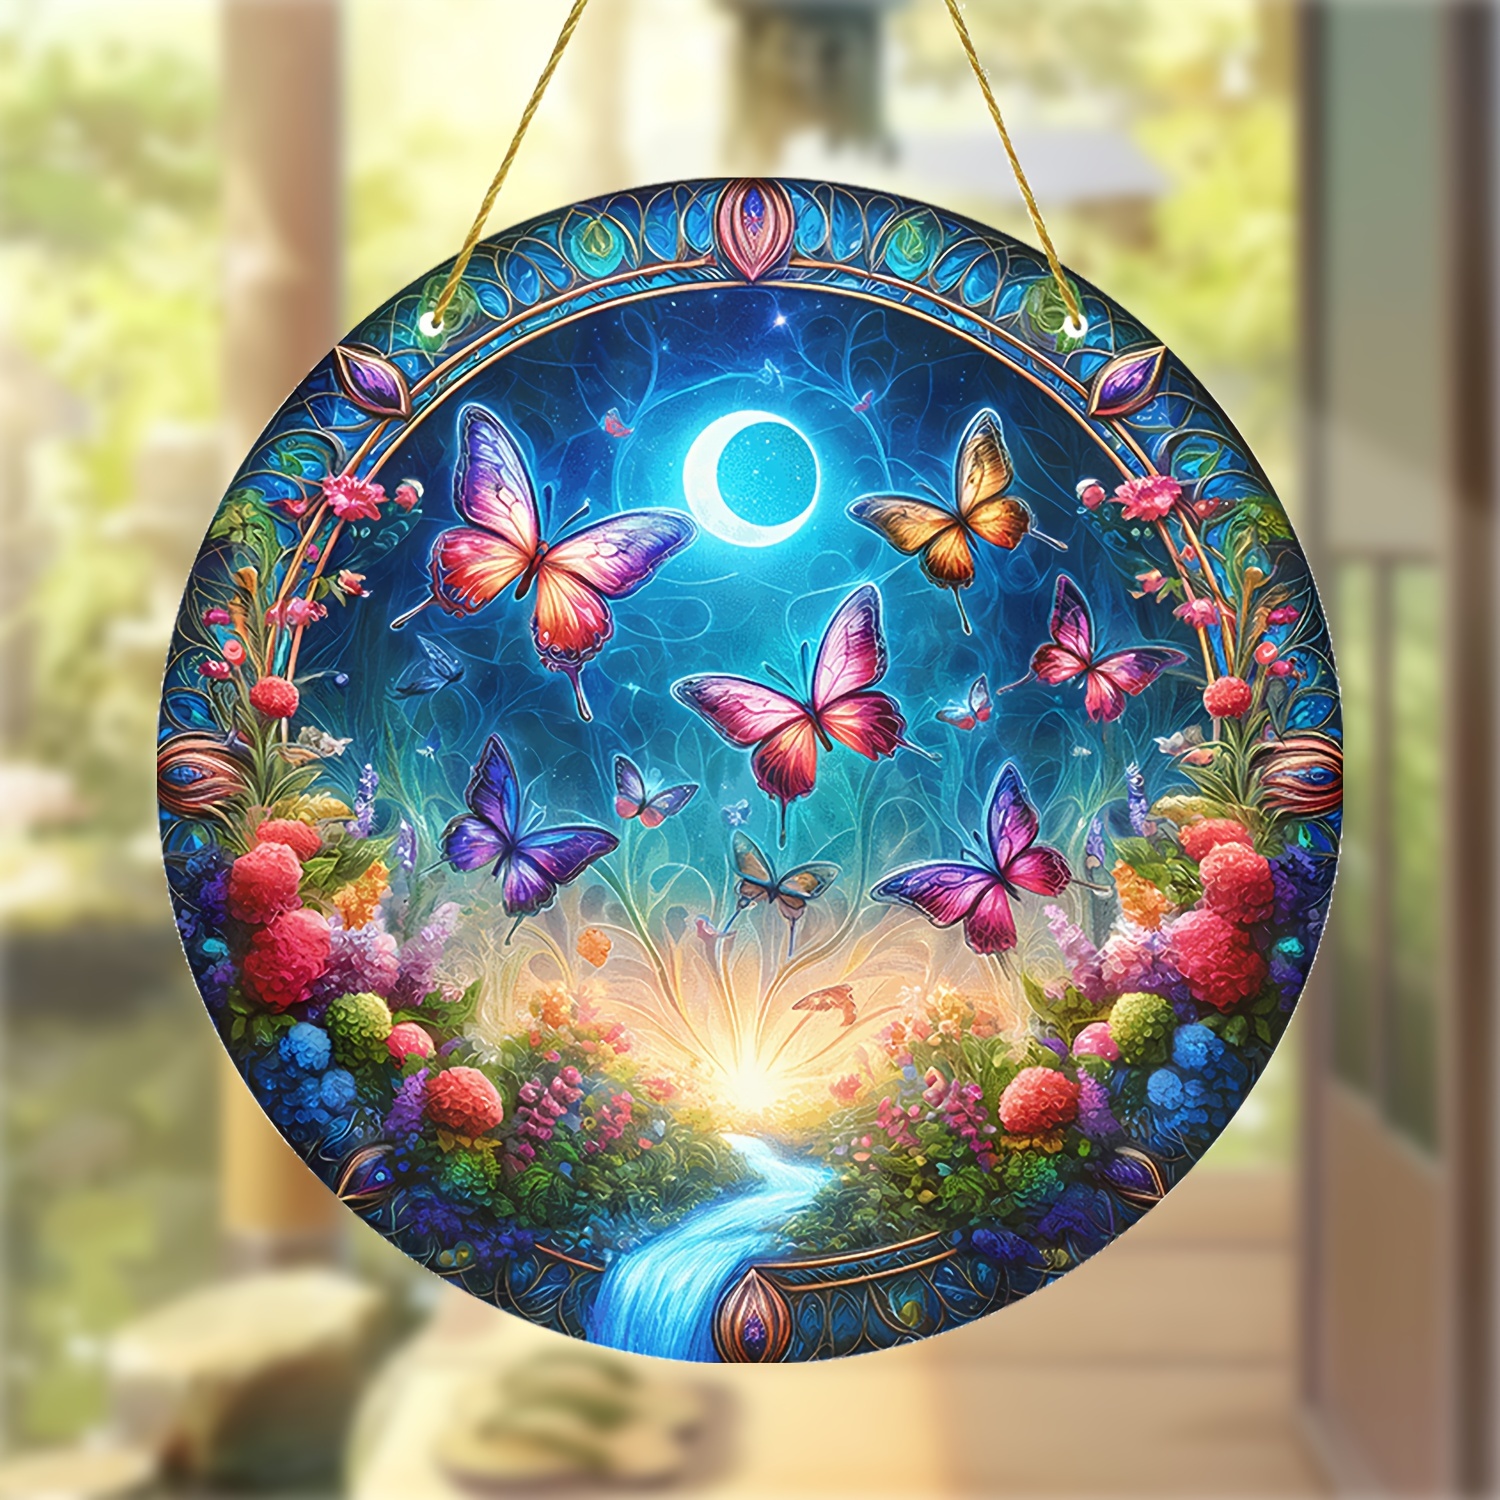 1pc, Butterfly Suncatcher Acrylic Plaque, Stain Glass Window Hanging (8''x8''), Wall Art Aesthetic, Outdoor Decoration For Yard Garden Farmhouse, Room Decoration For Bedroom Living Room, Party Decor, Landscape Decor, Housewarming Gifts For New Home Patio Decor Yard Decor